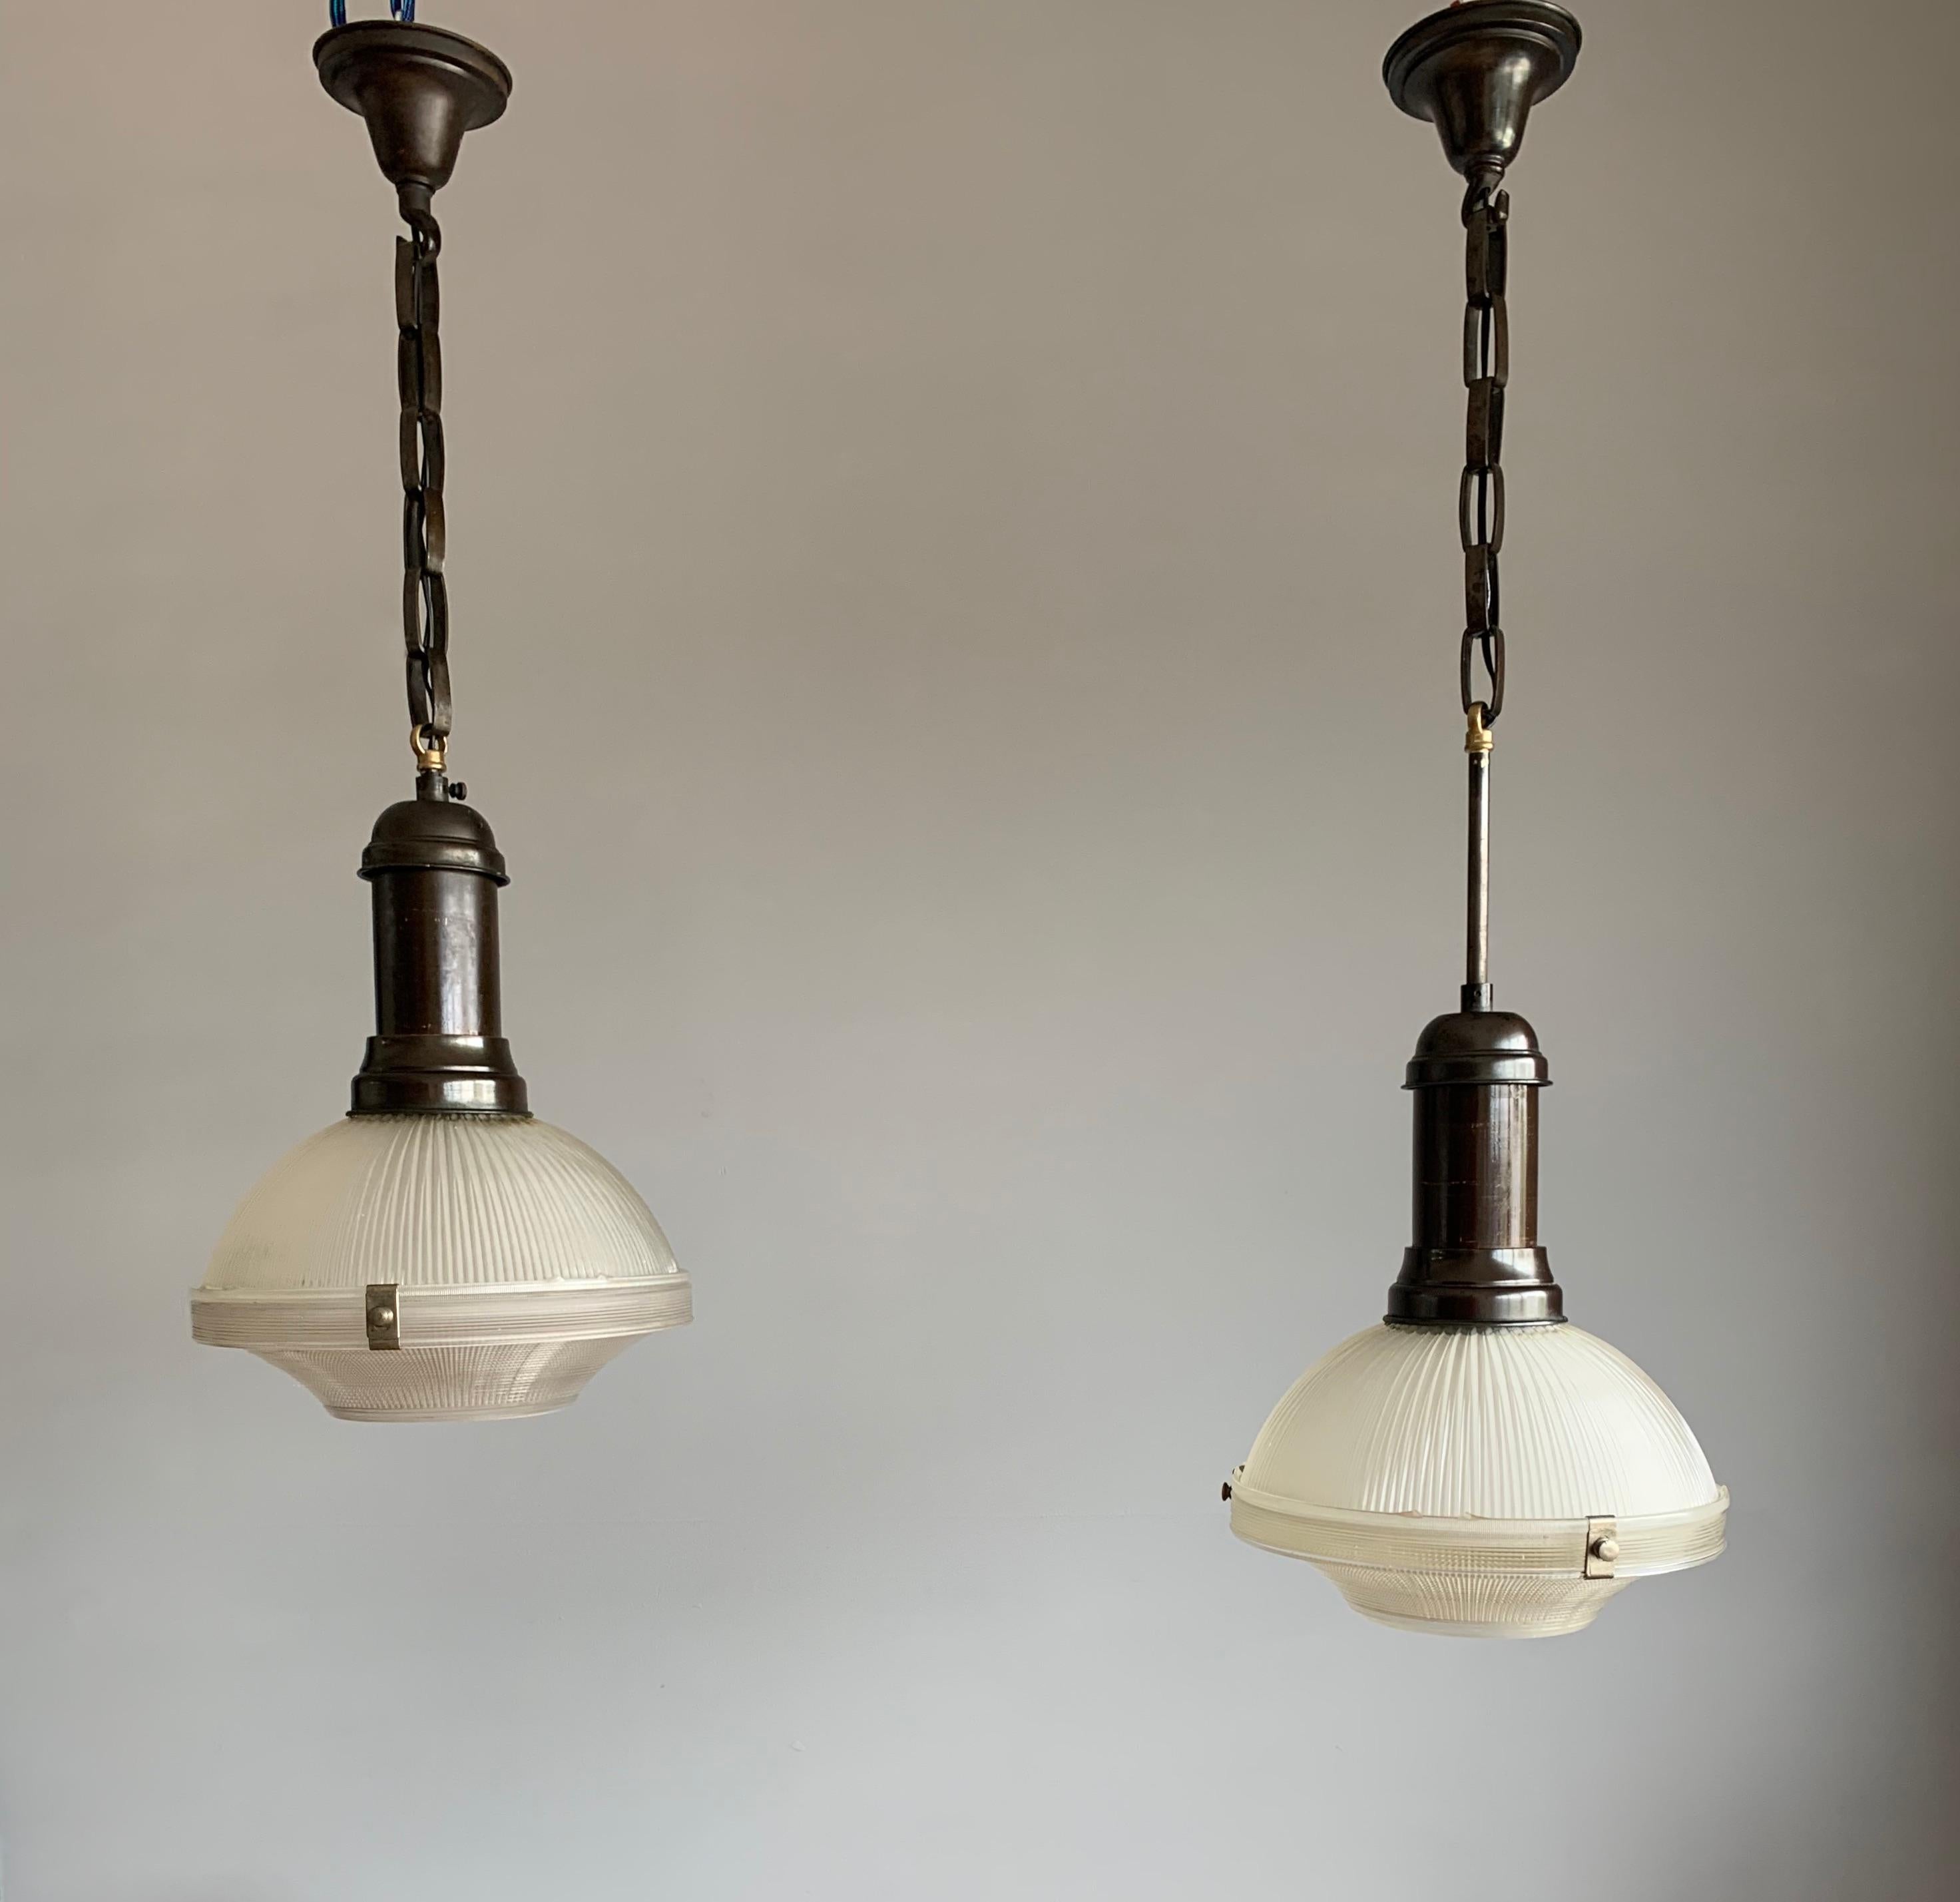 Top quality and condition, matching pair of Holophane light fixtures.

It does not matter whether you are decorating an Art Deco, a Mid-Century Modern or a more contemporary home or office, if you have the right space for them then this stunning,